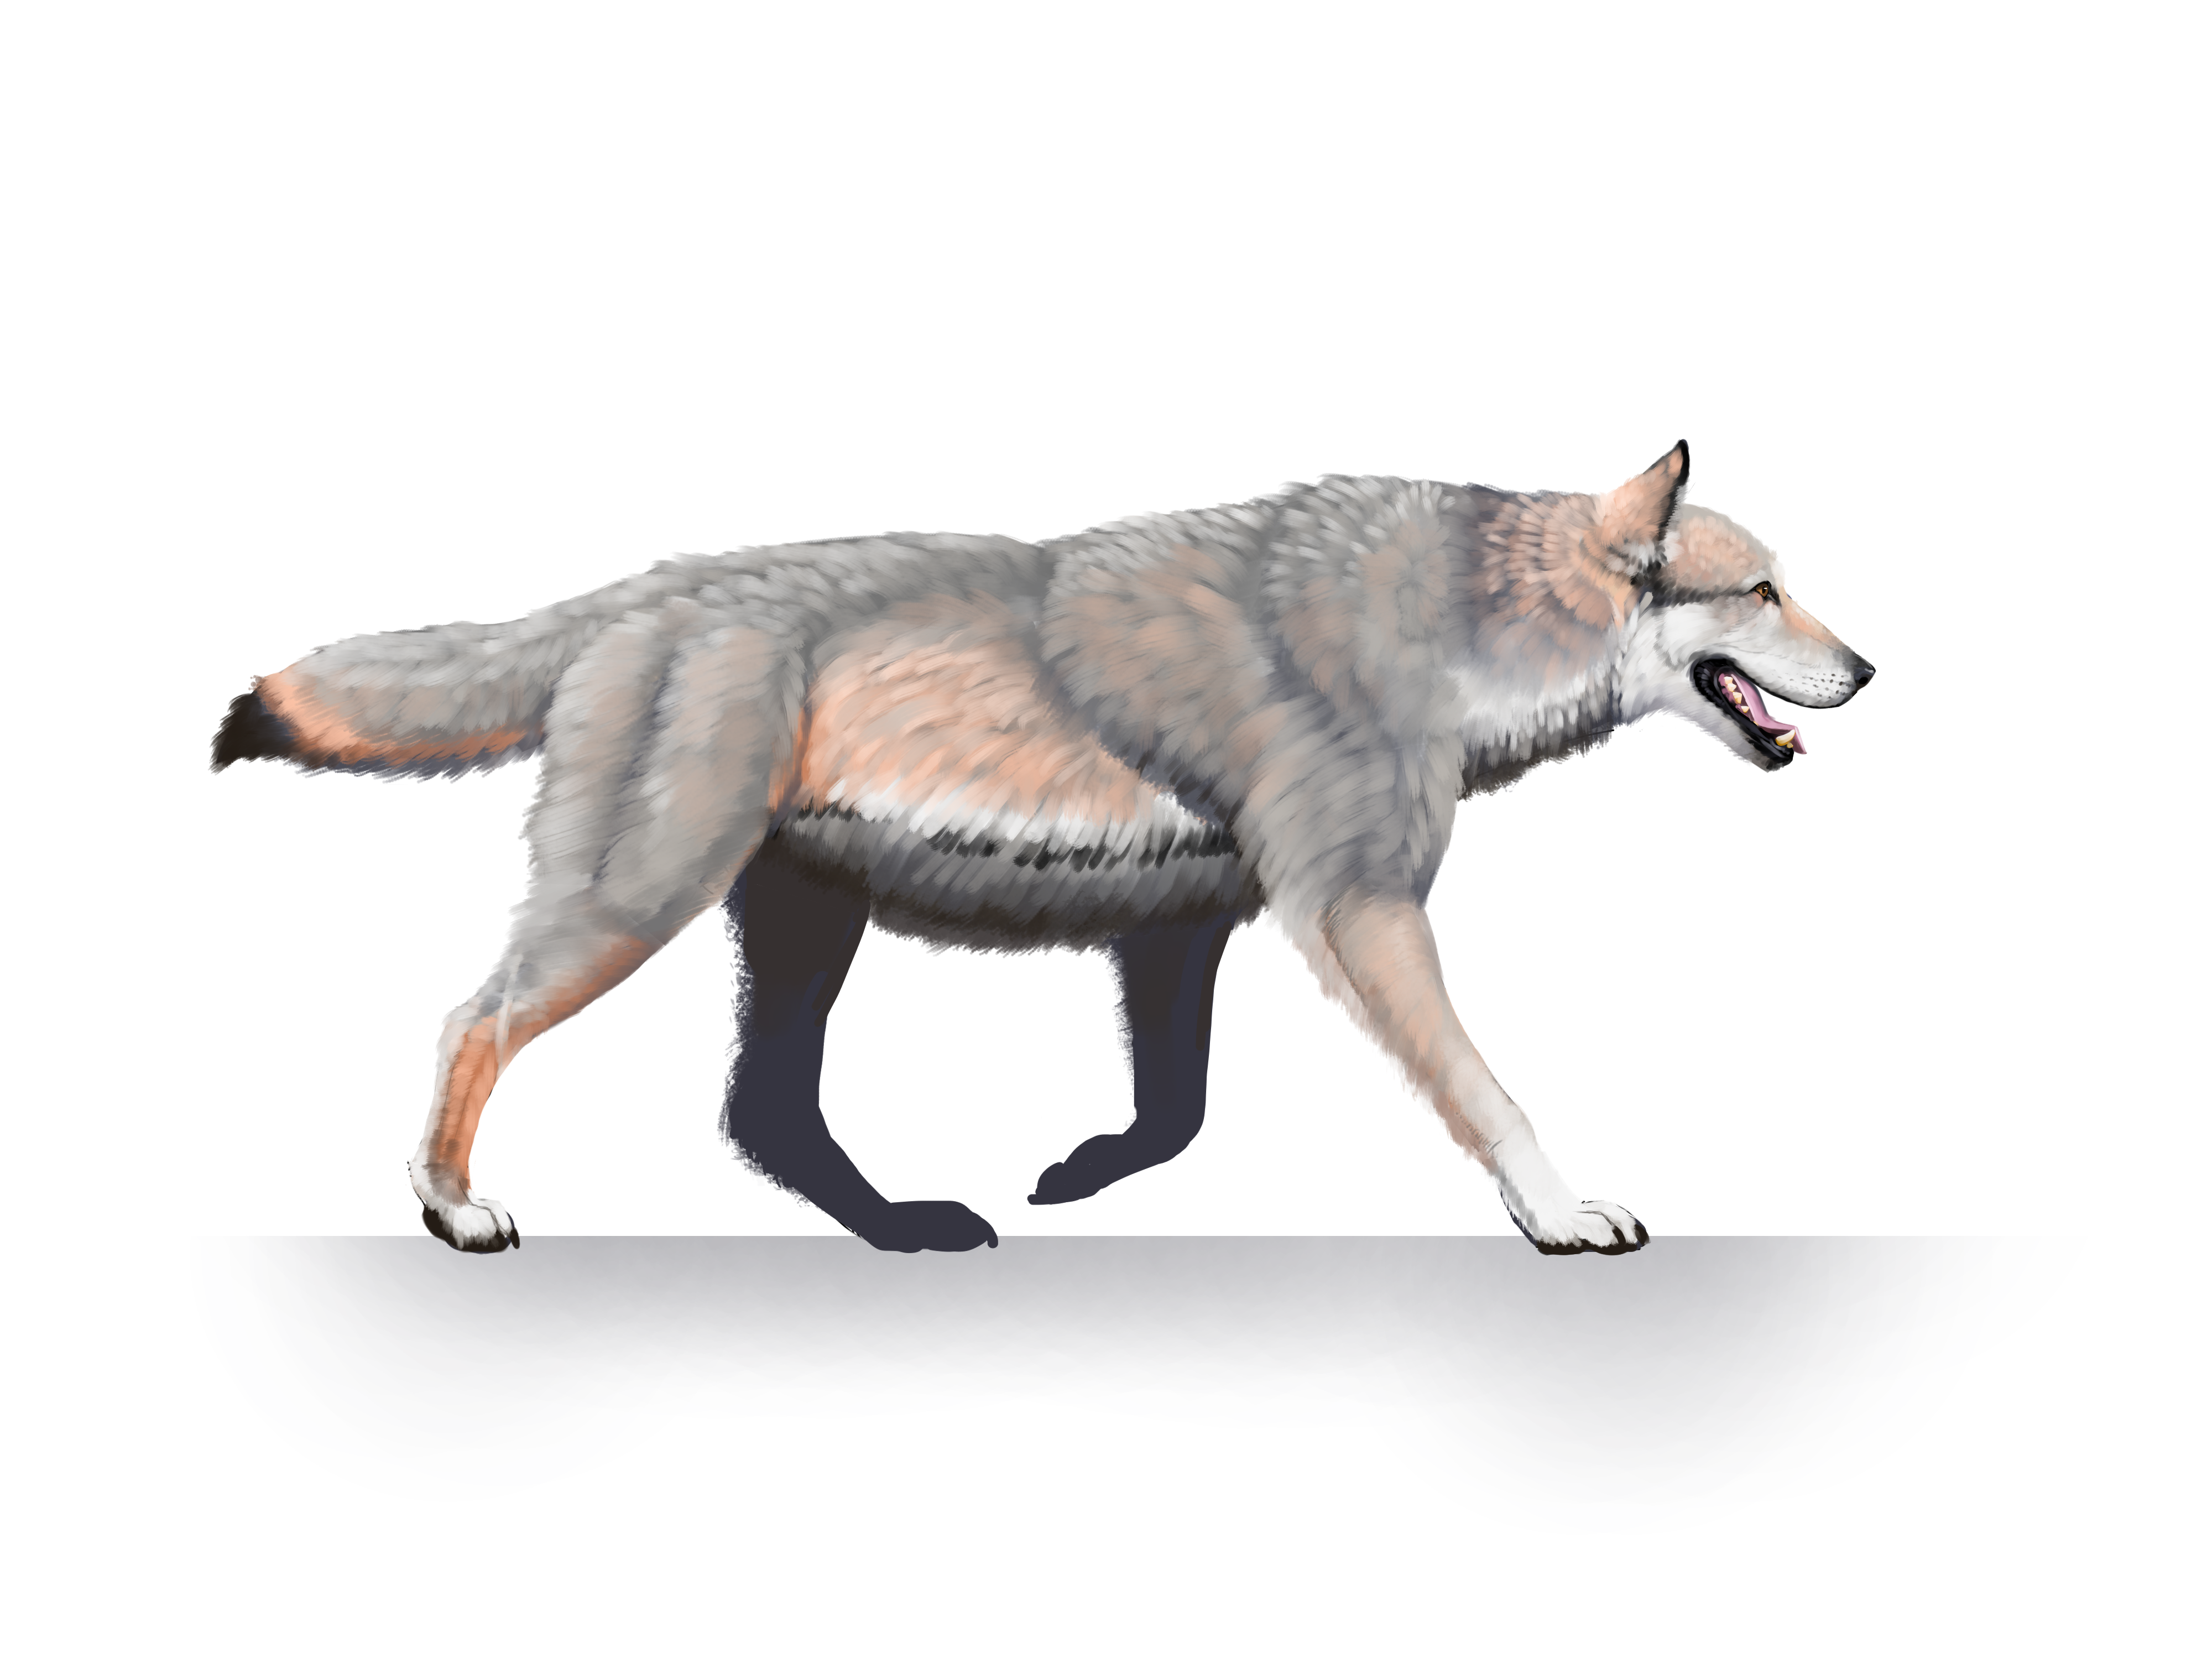 Related image of Dire Wolf Images.